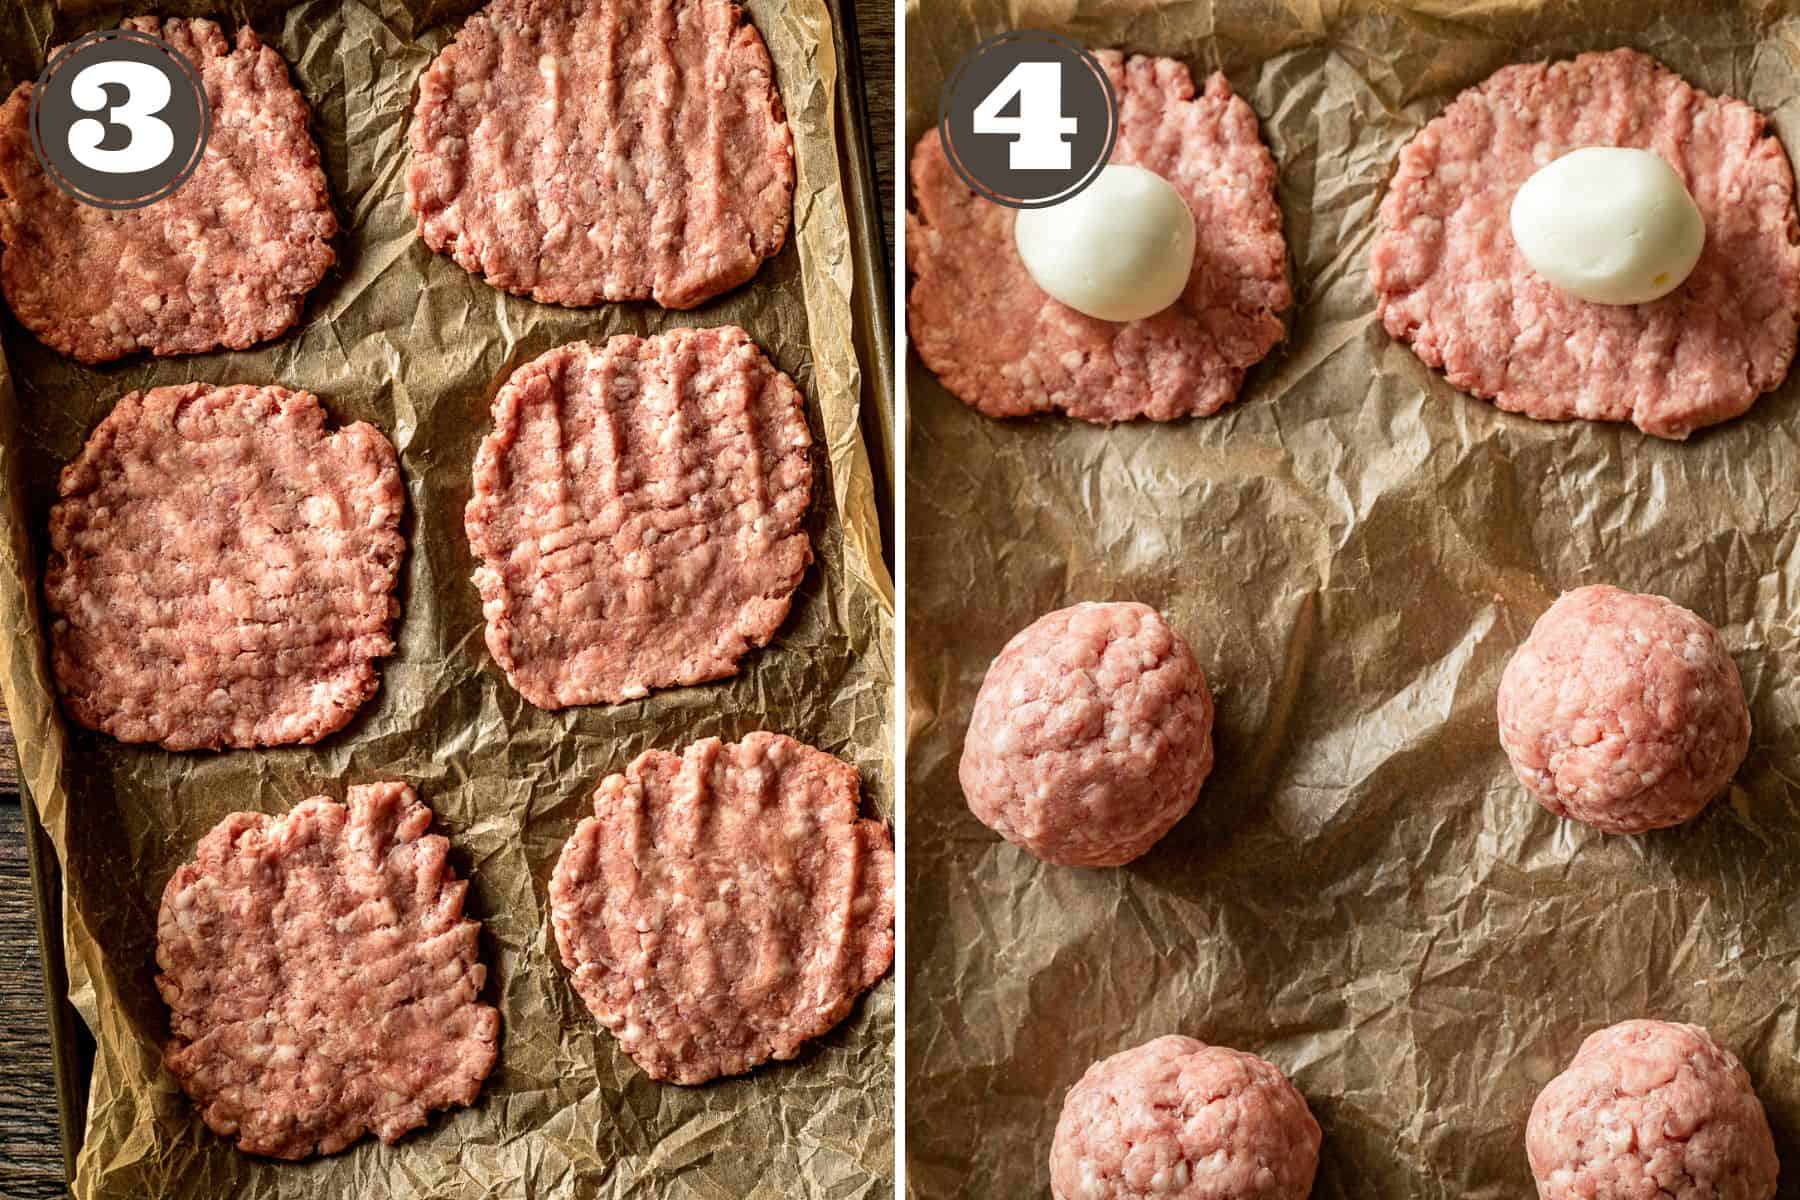 Side by side photos showing ground pork made into patties and wrapping the patties around a hard boiled egg. 